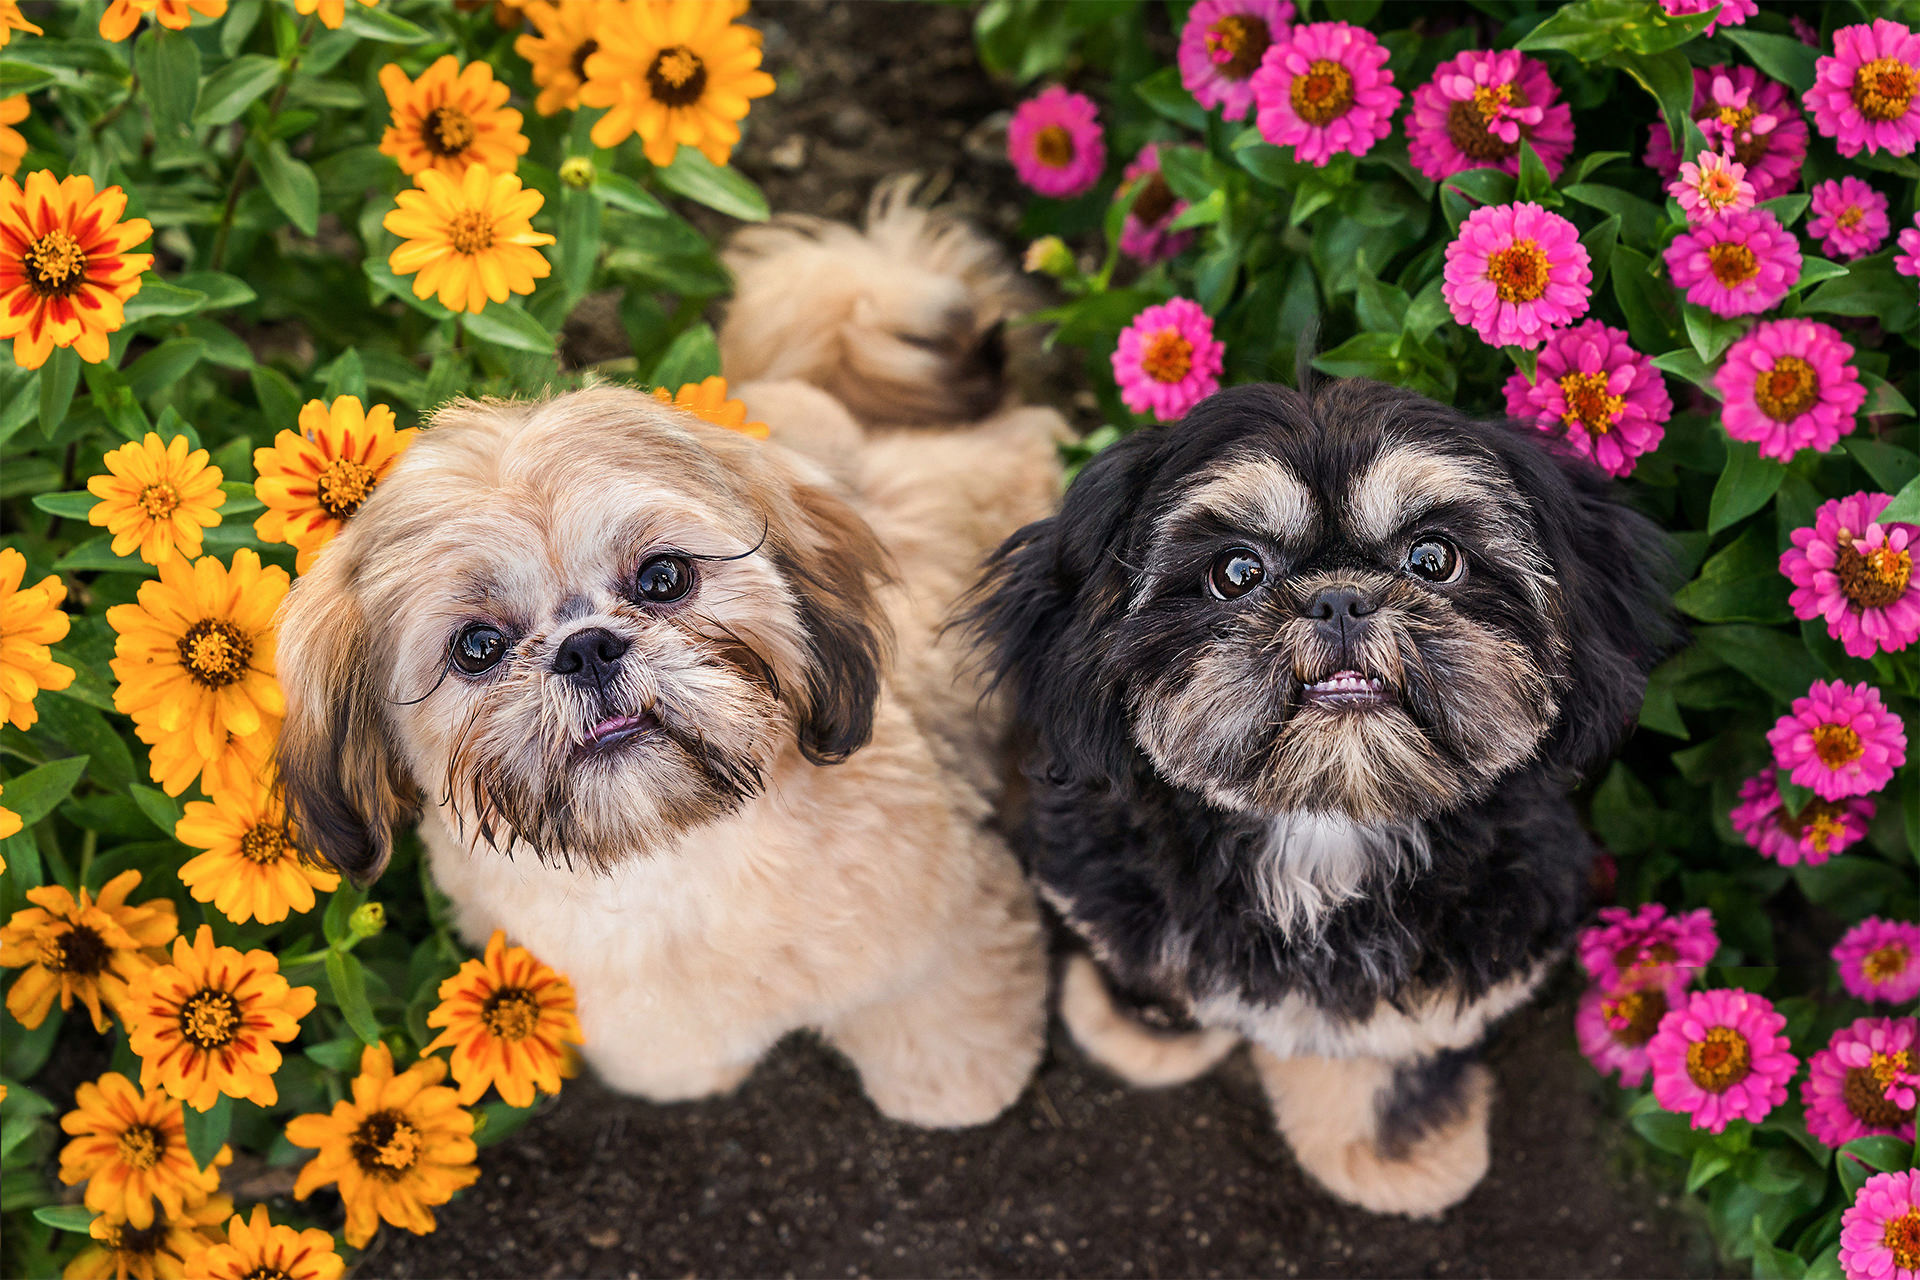 two shih tzu dogs look up amongst colorful flowers in Washinton